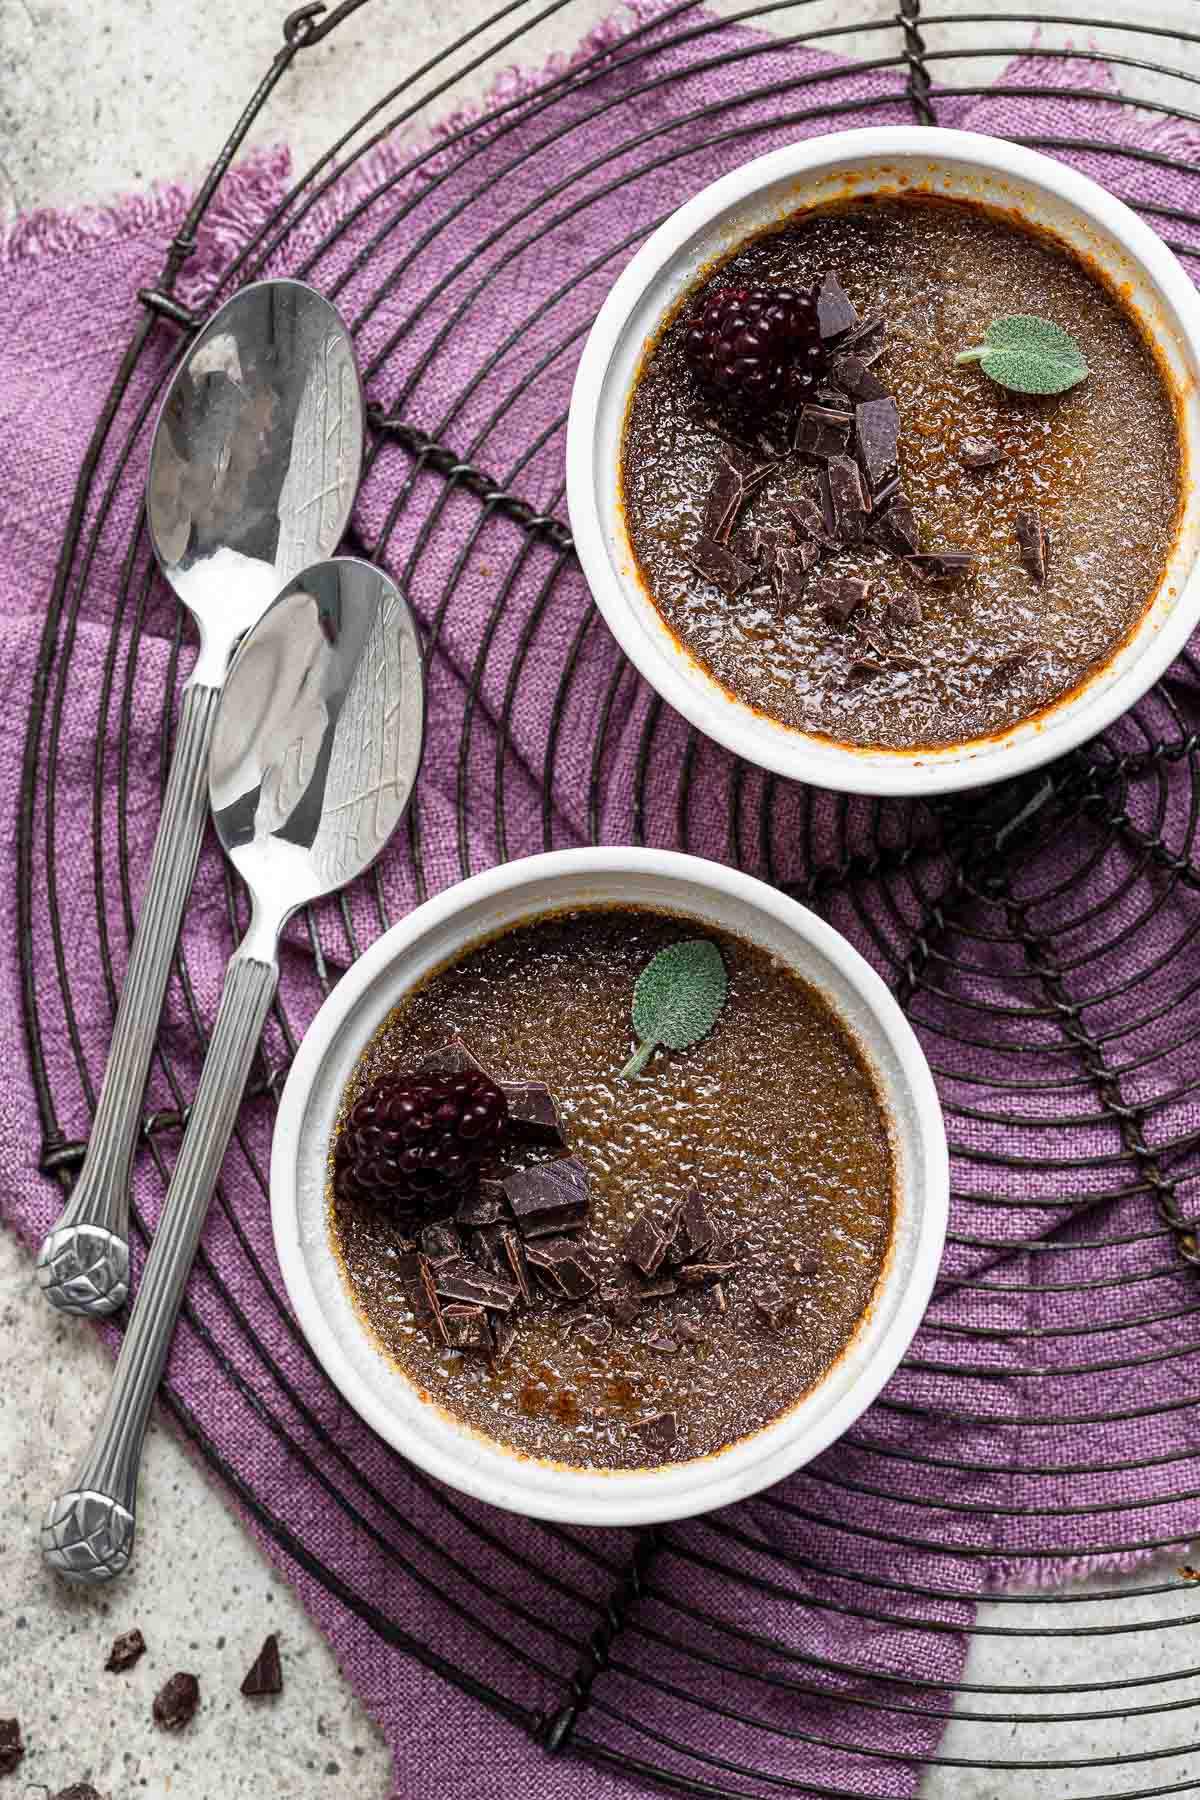 Two ramekins of chocolate creme brulee on wire rack with spoons.